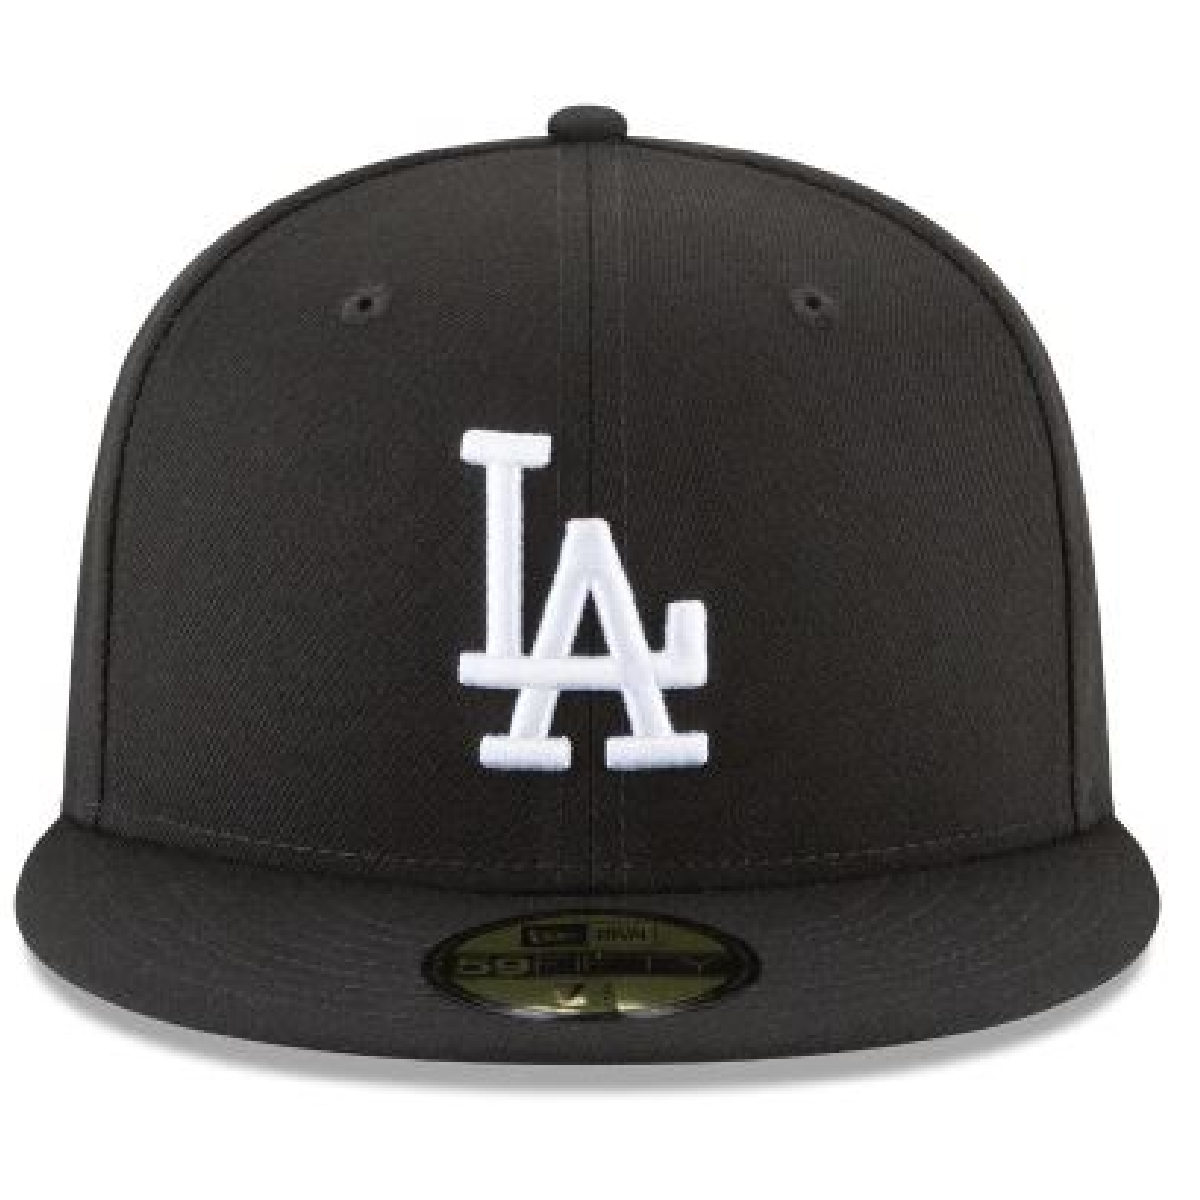 Los Angeles Dodgers NEW ERA BASIC COLLECTION FITTED 59FIFTY-BLACK AND WHITE